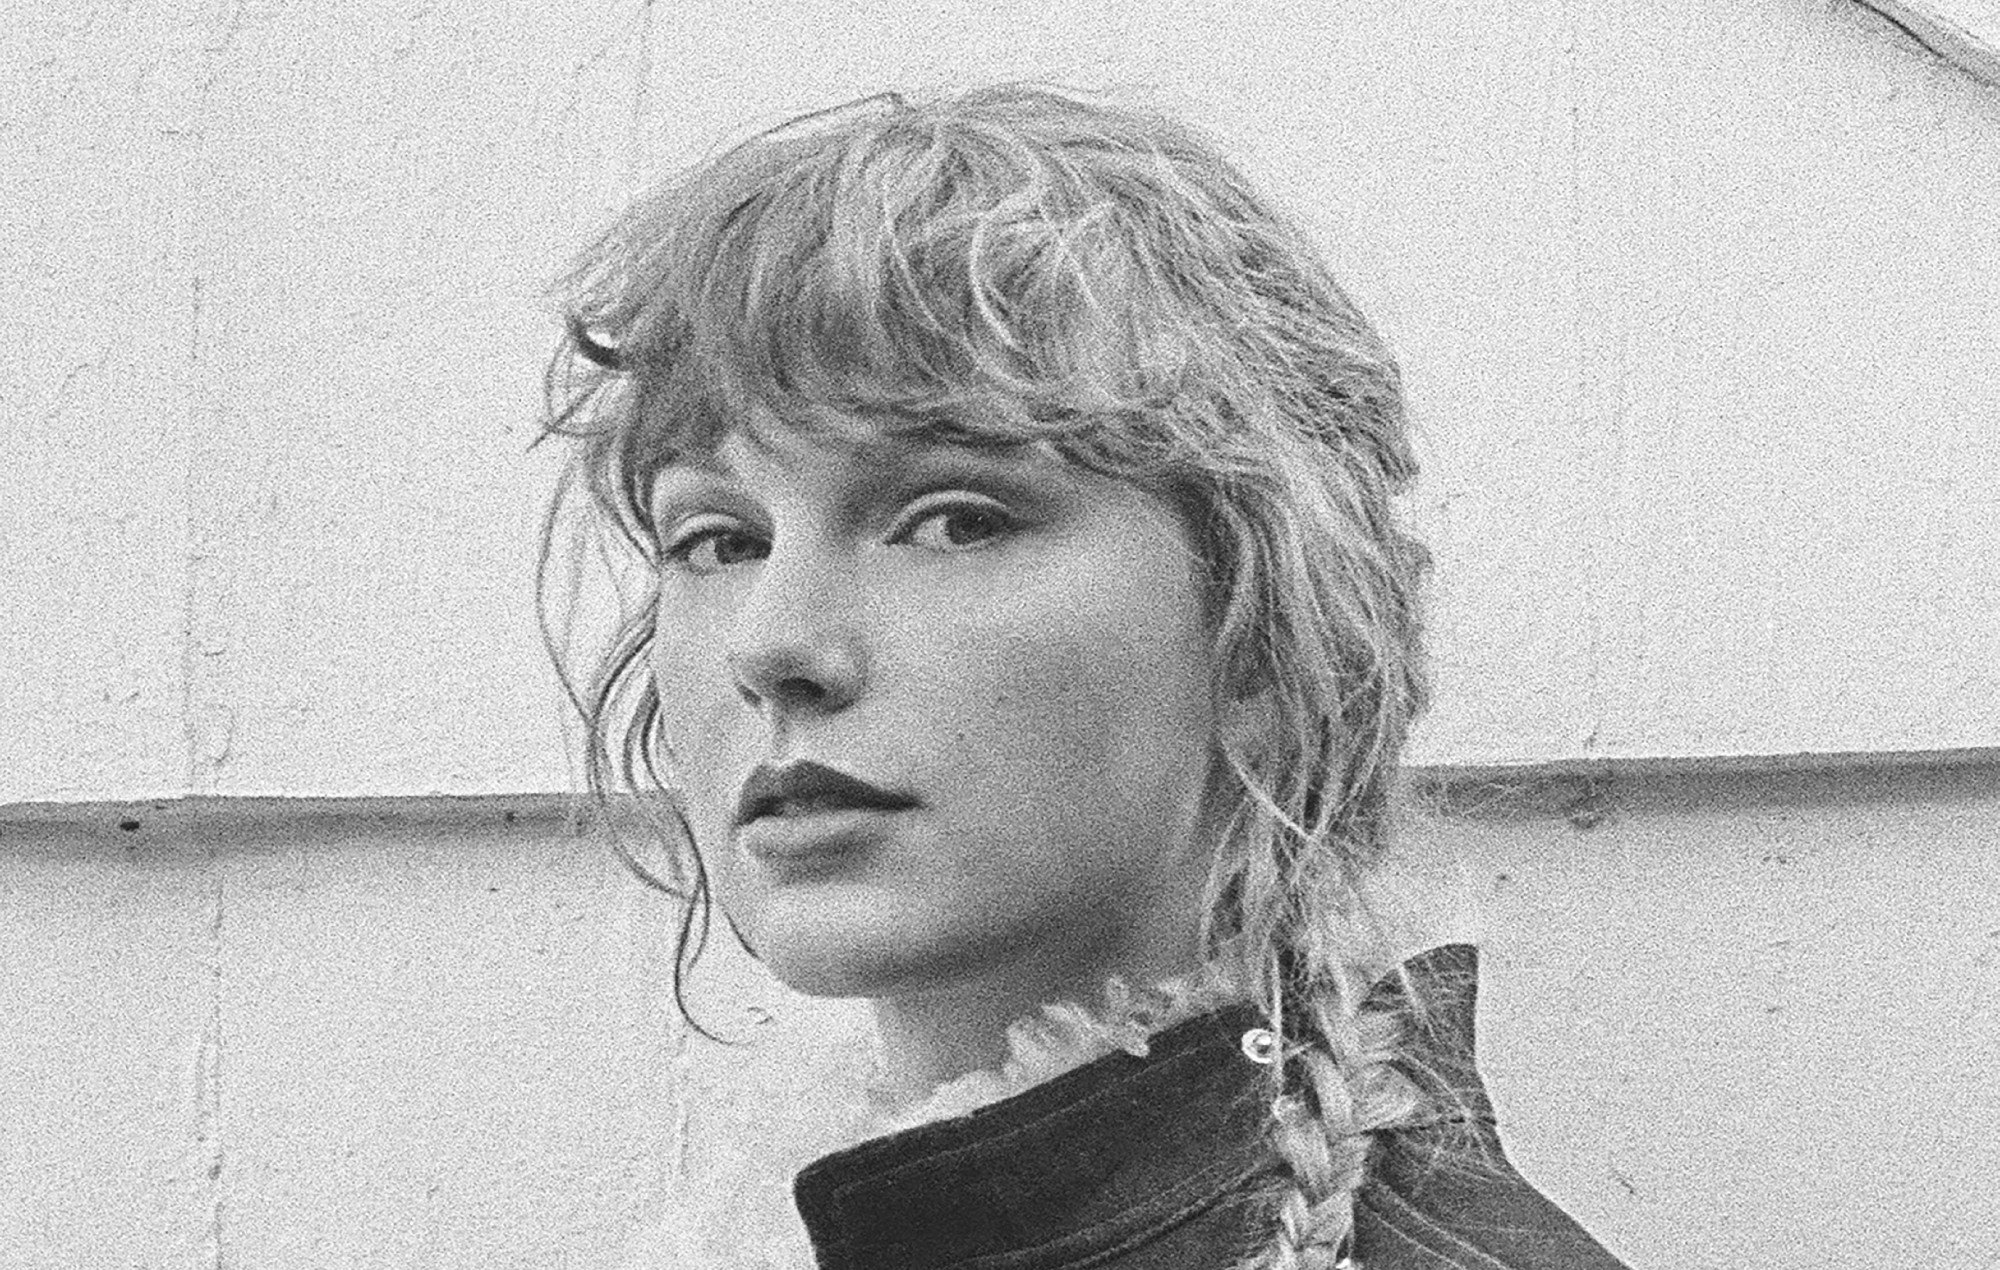 Read Taylor Swift's essay on her ninth album, 'Evermore': "I have no idea what comes next"